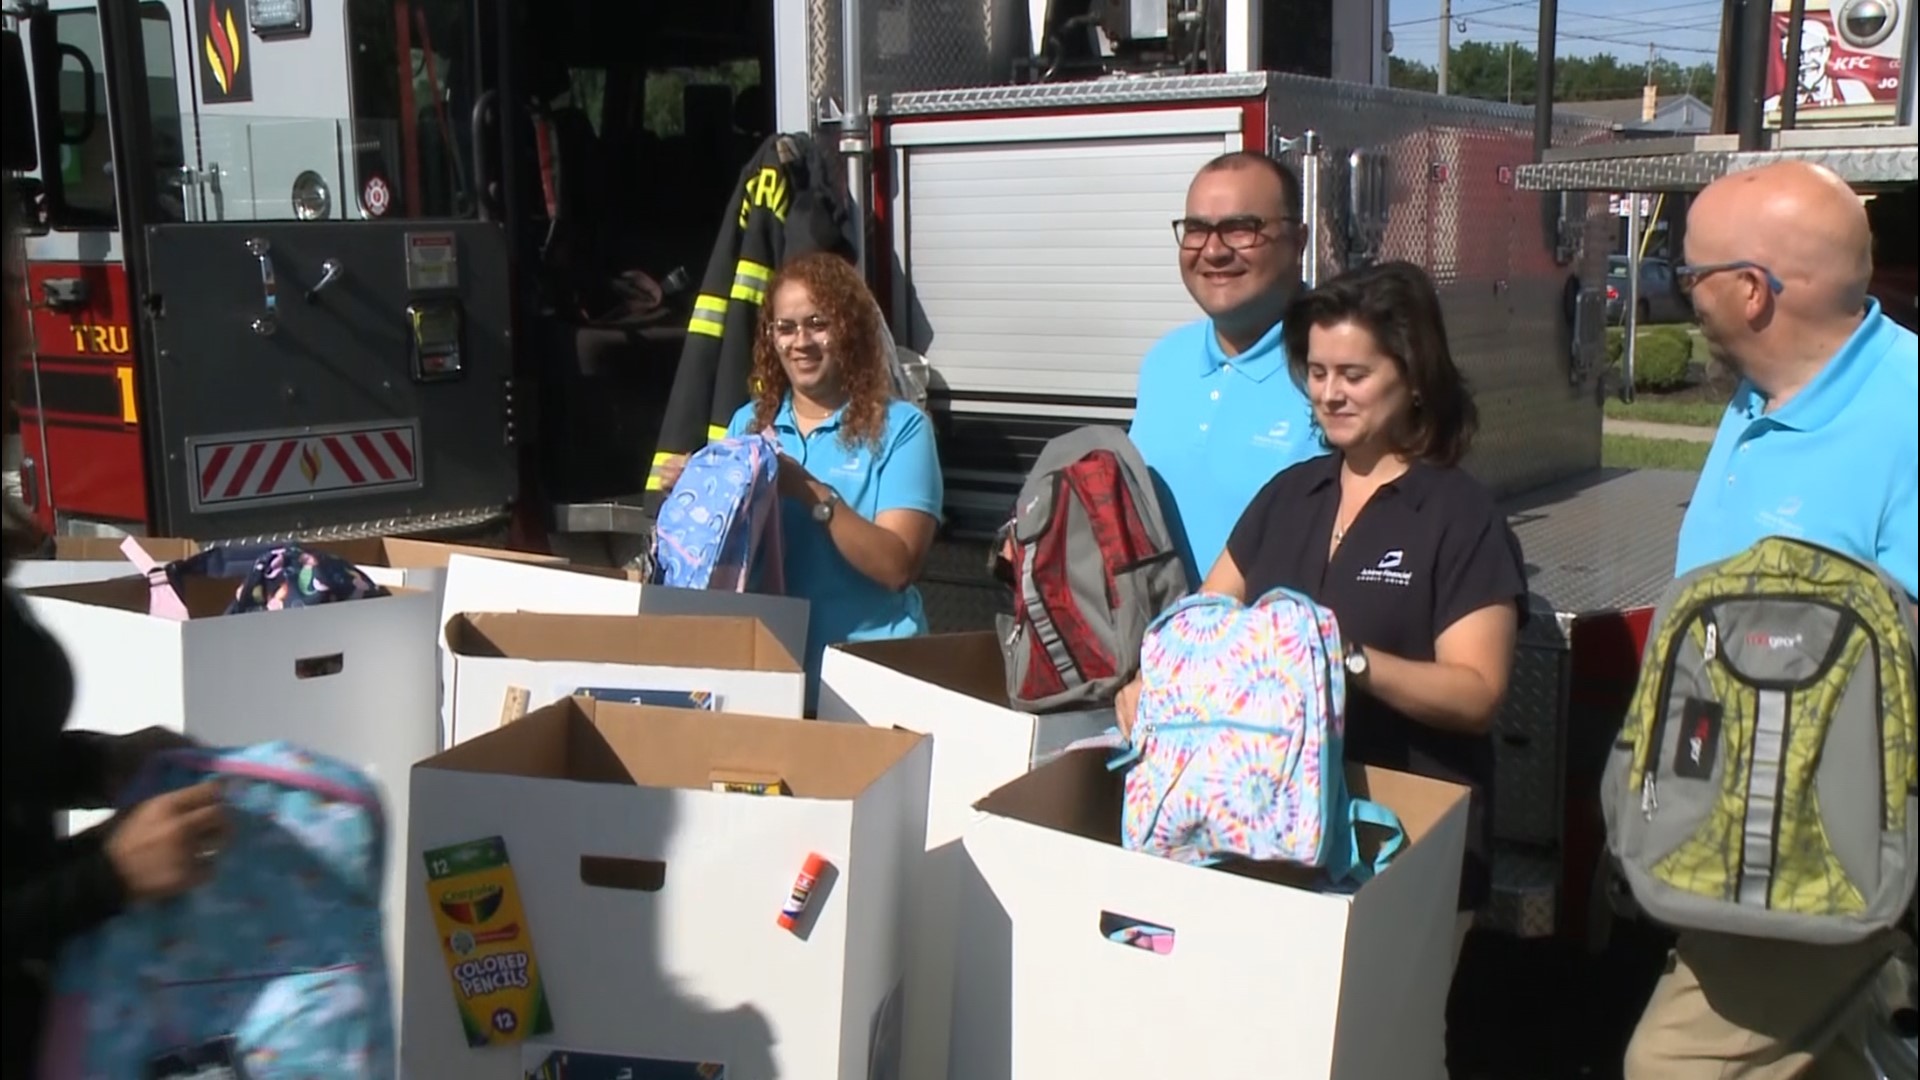 The expo has become a community cornerstone organized by Meriden Fire Local 1148. The event features school supply giveaways, local non-profits, and meet-and-greets